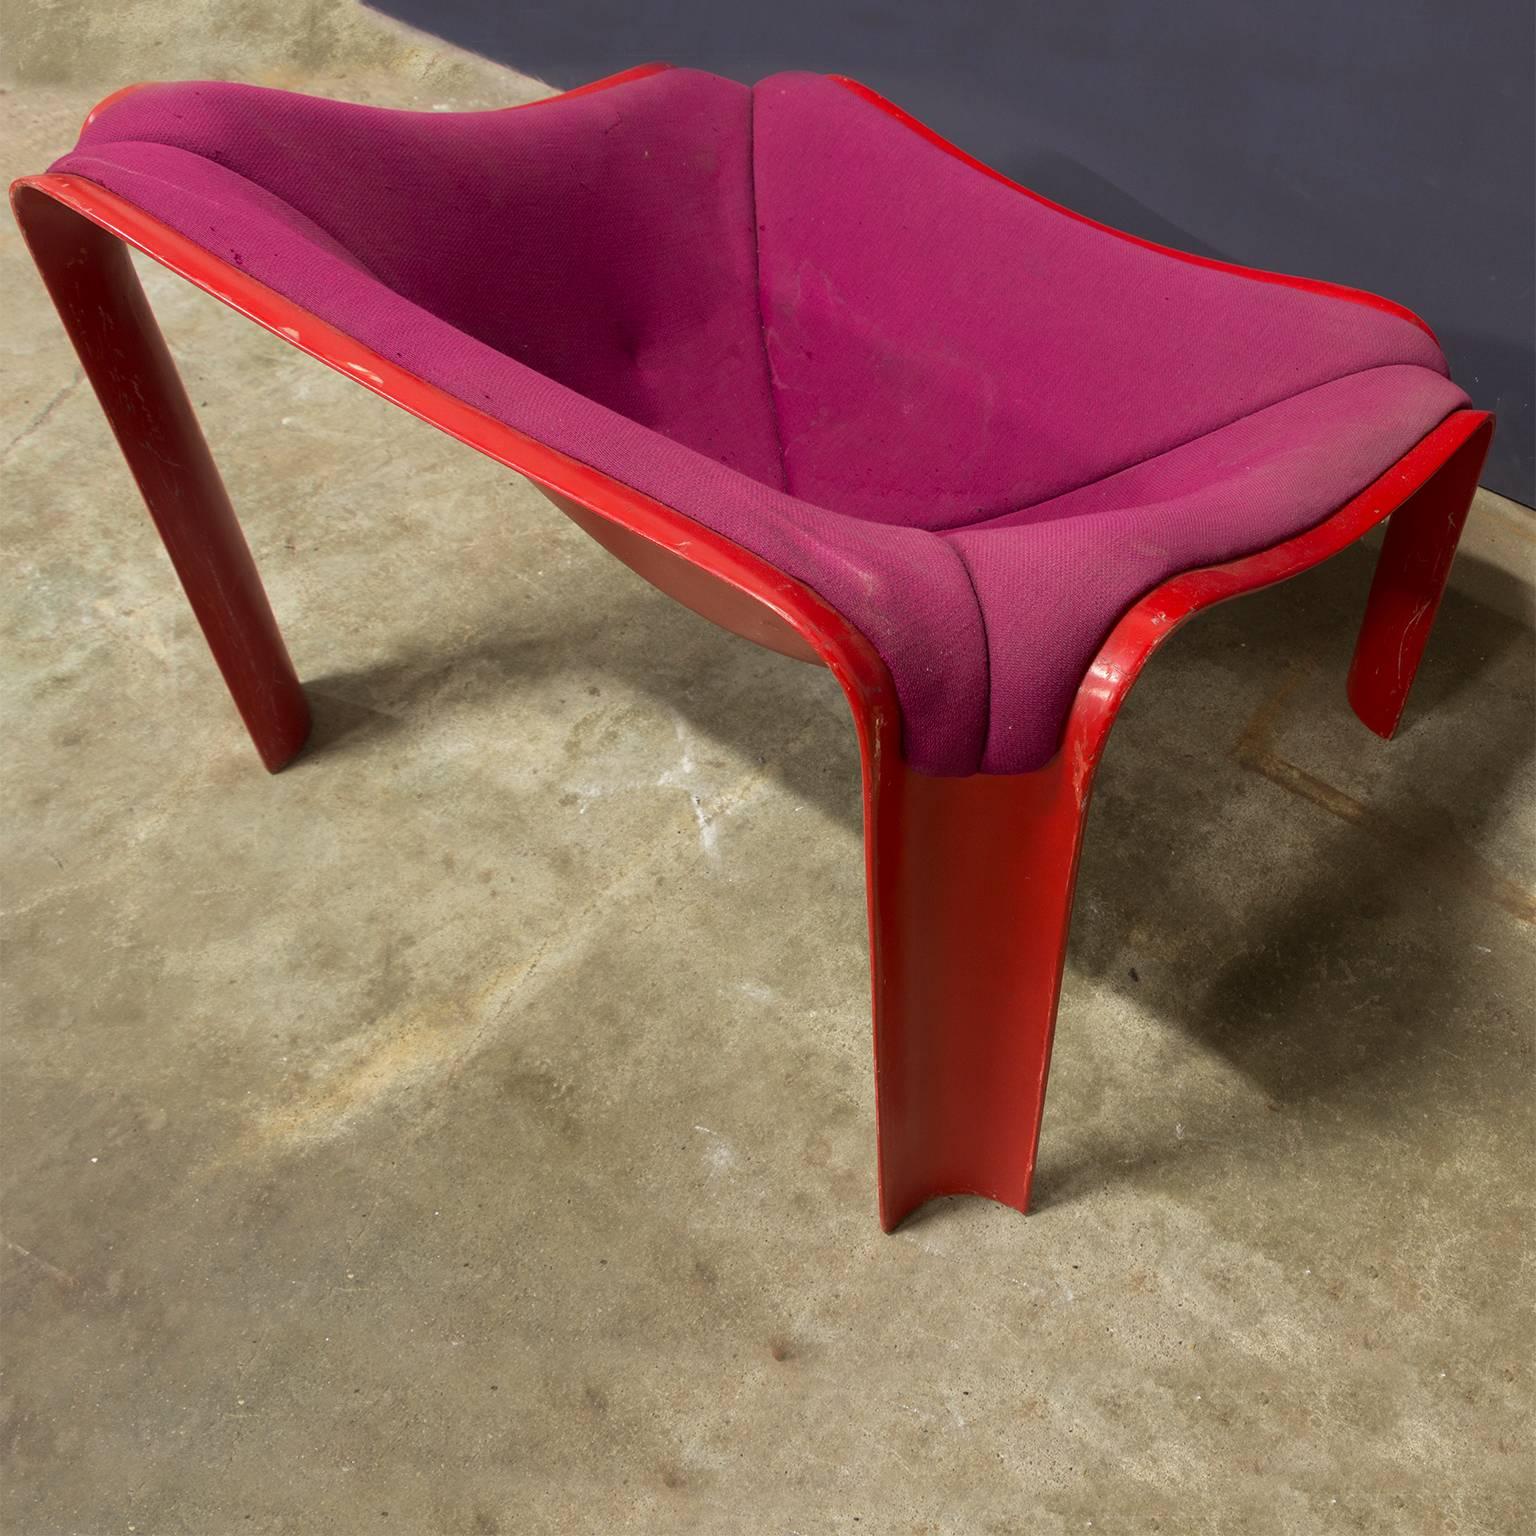 Mid-20th Century 1963, Pierre Paulin, F303 Lounge Chair in Red with Upholstery for Artifort